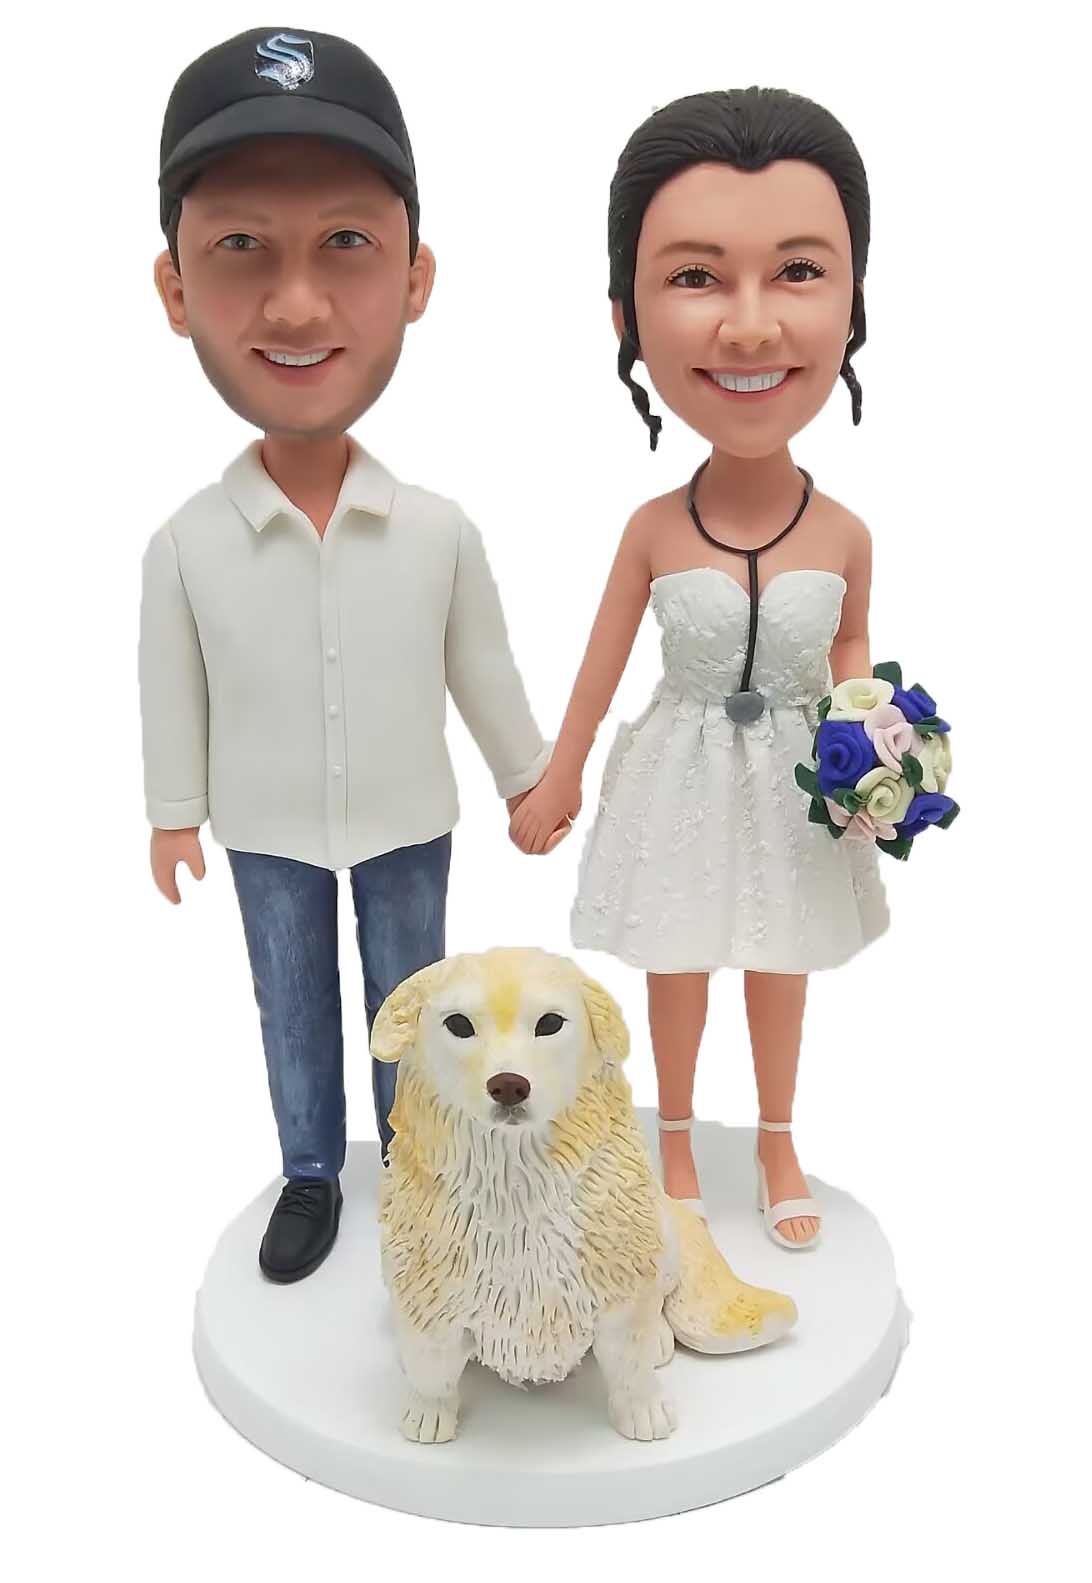 Custom cake topper personalized wedding cake toppers（no pet）